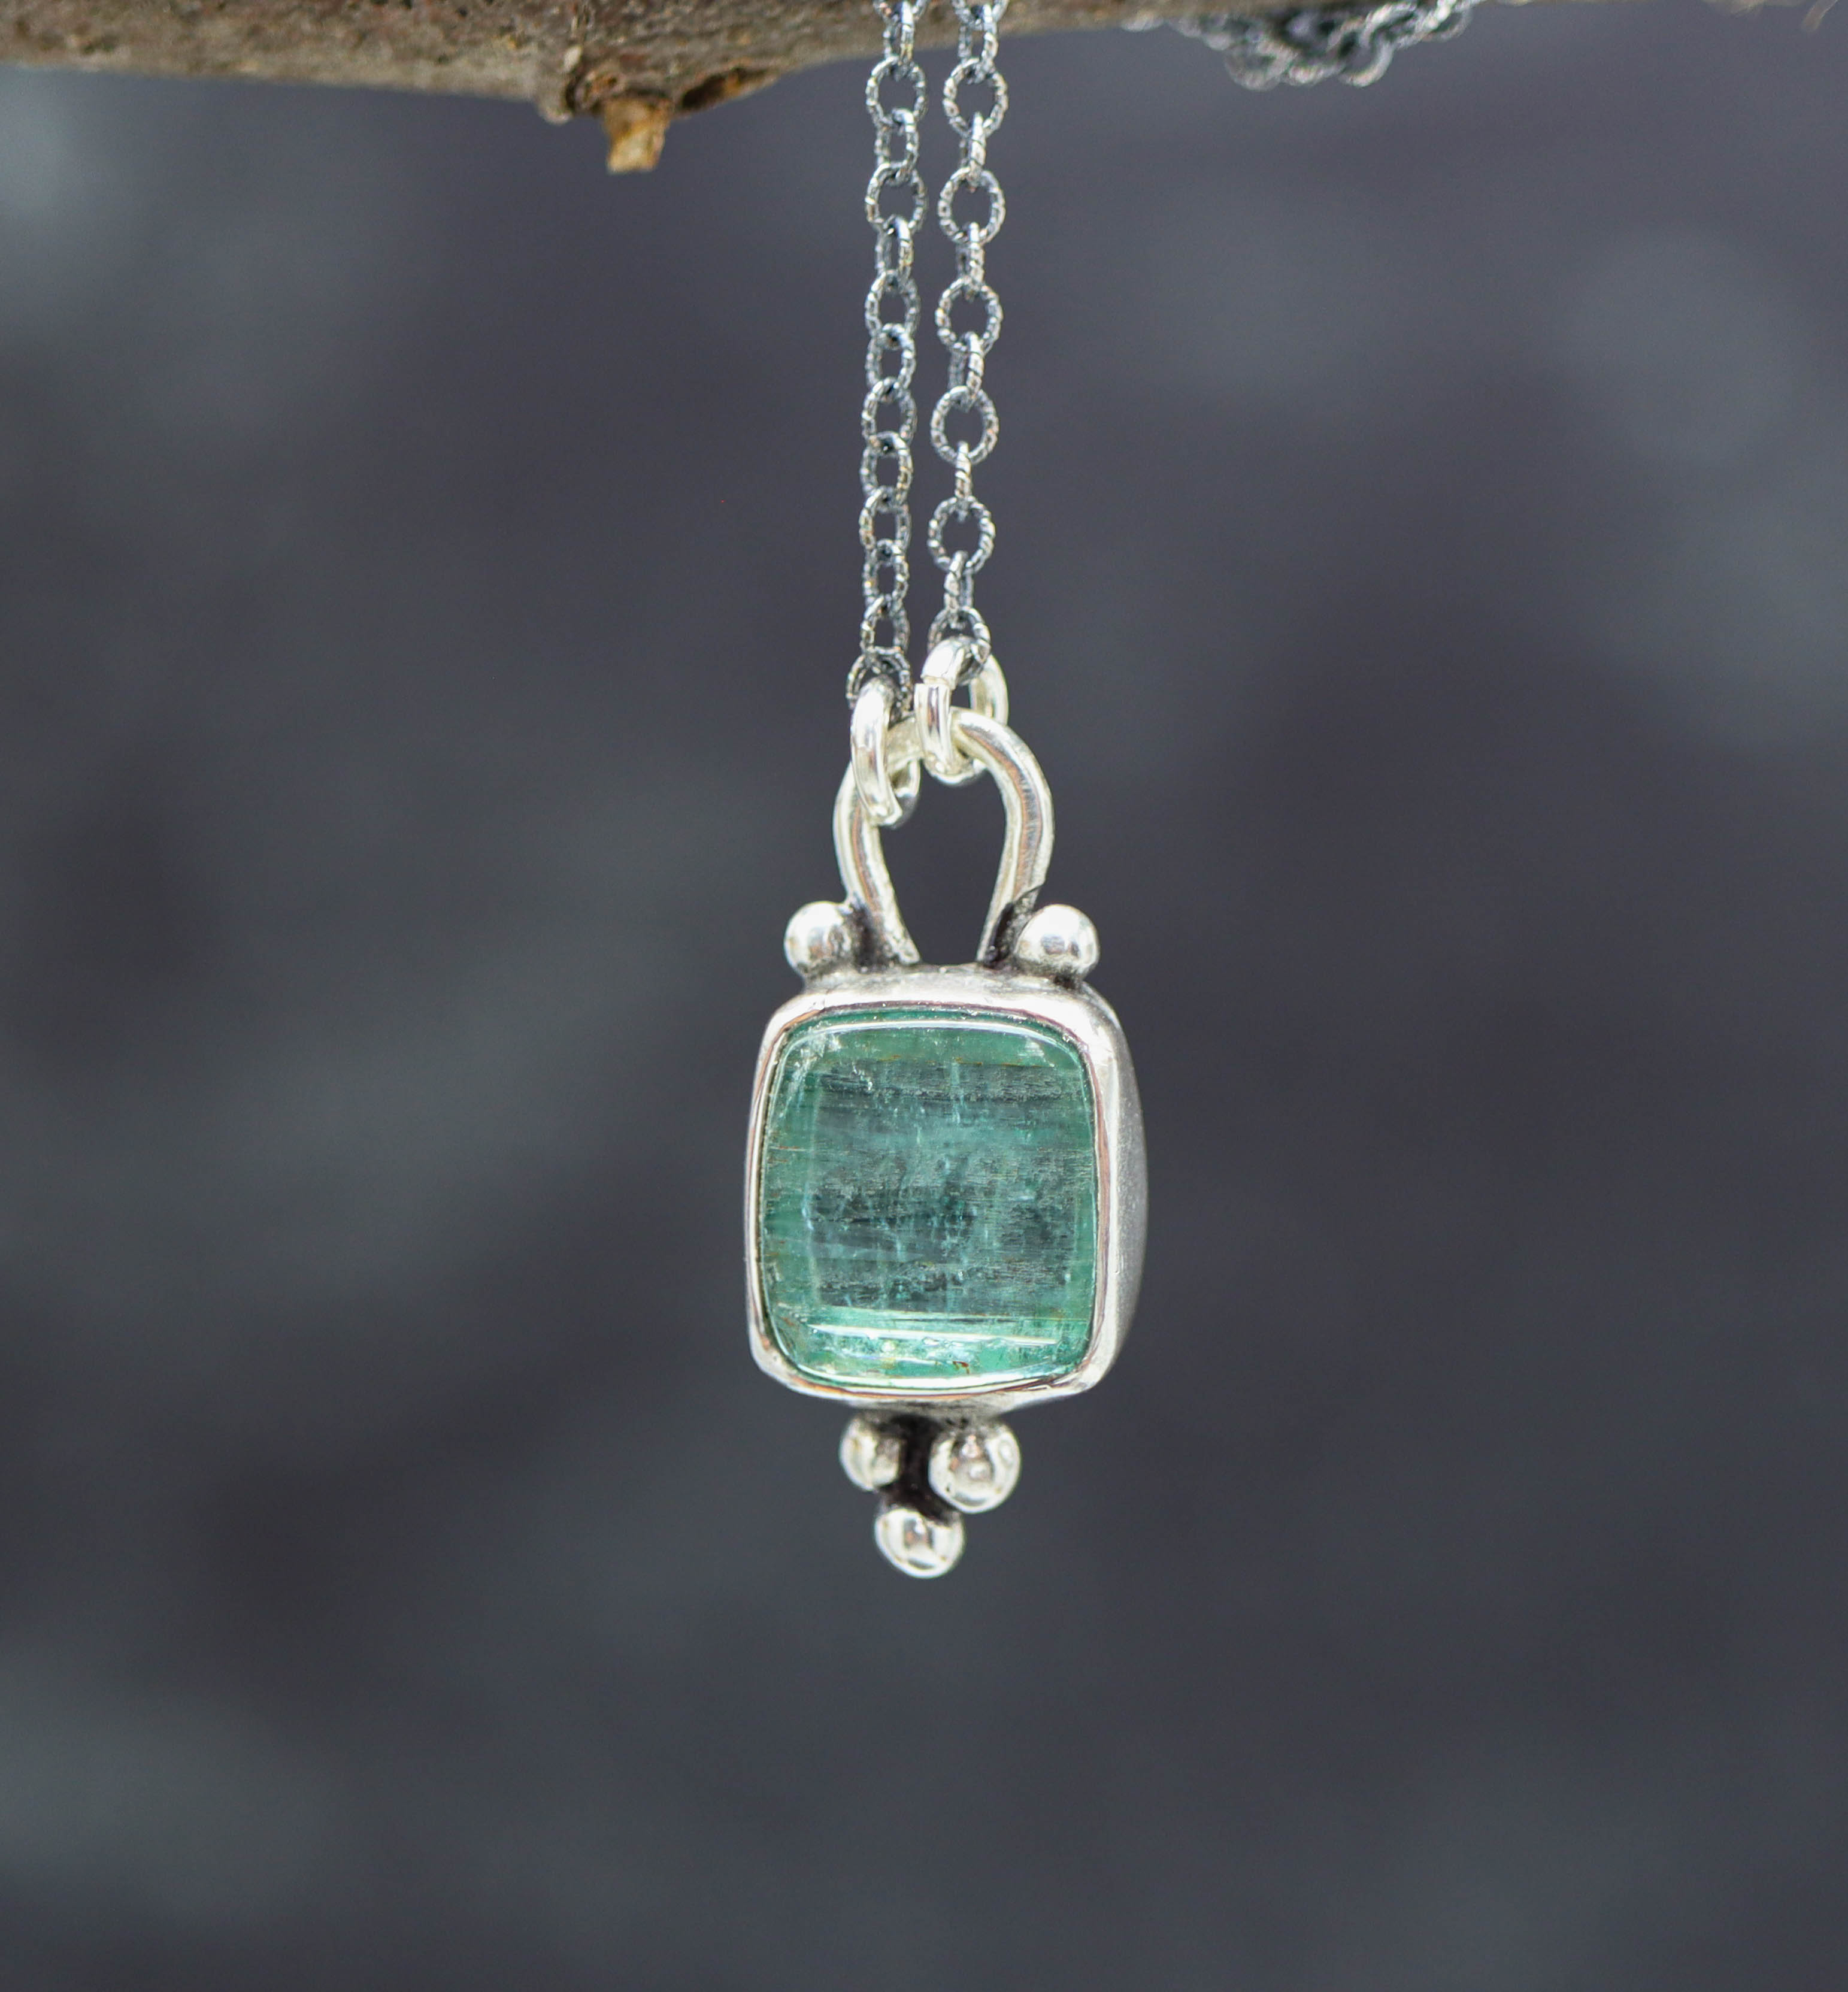 Raw Natural Surface Blue Tourmaline Slice Pendant Necklace Sterling Silver